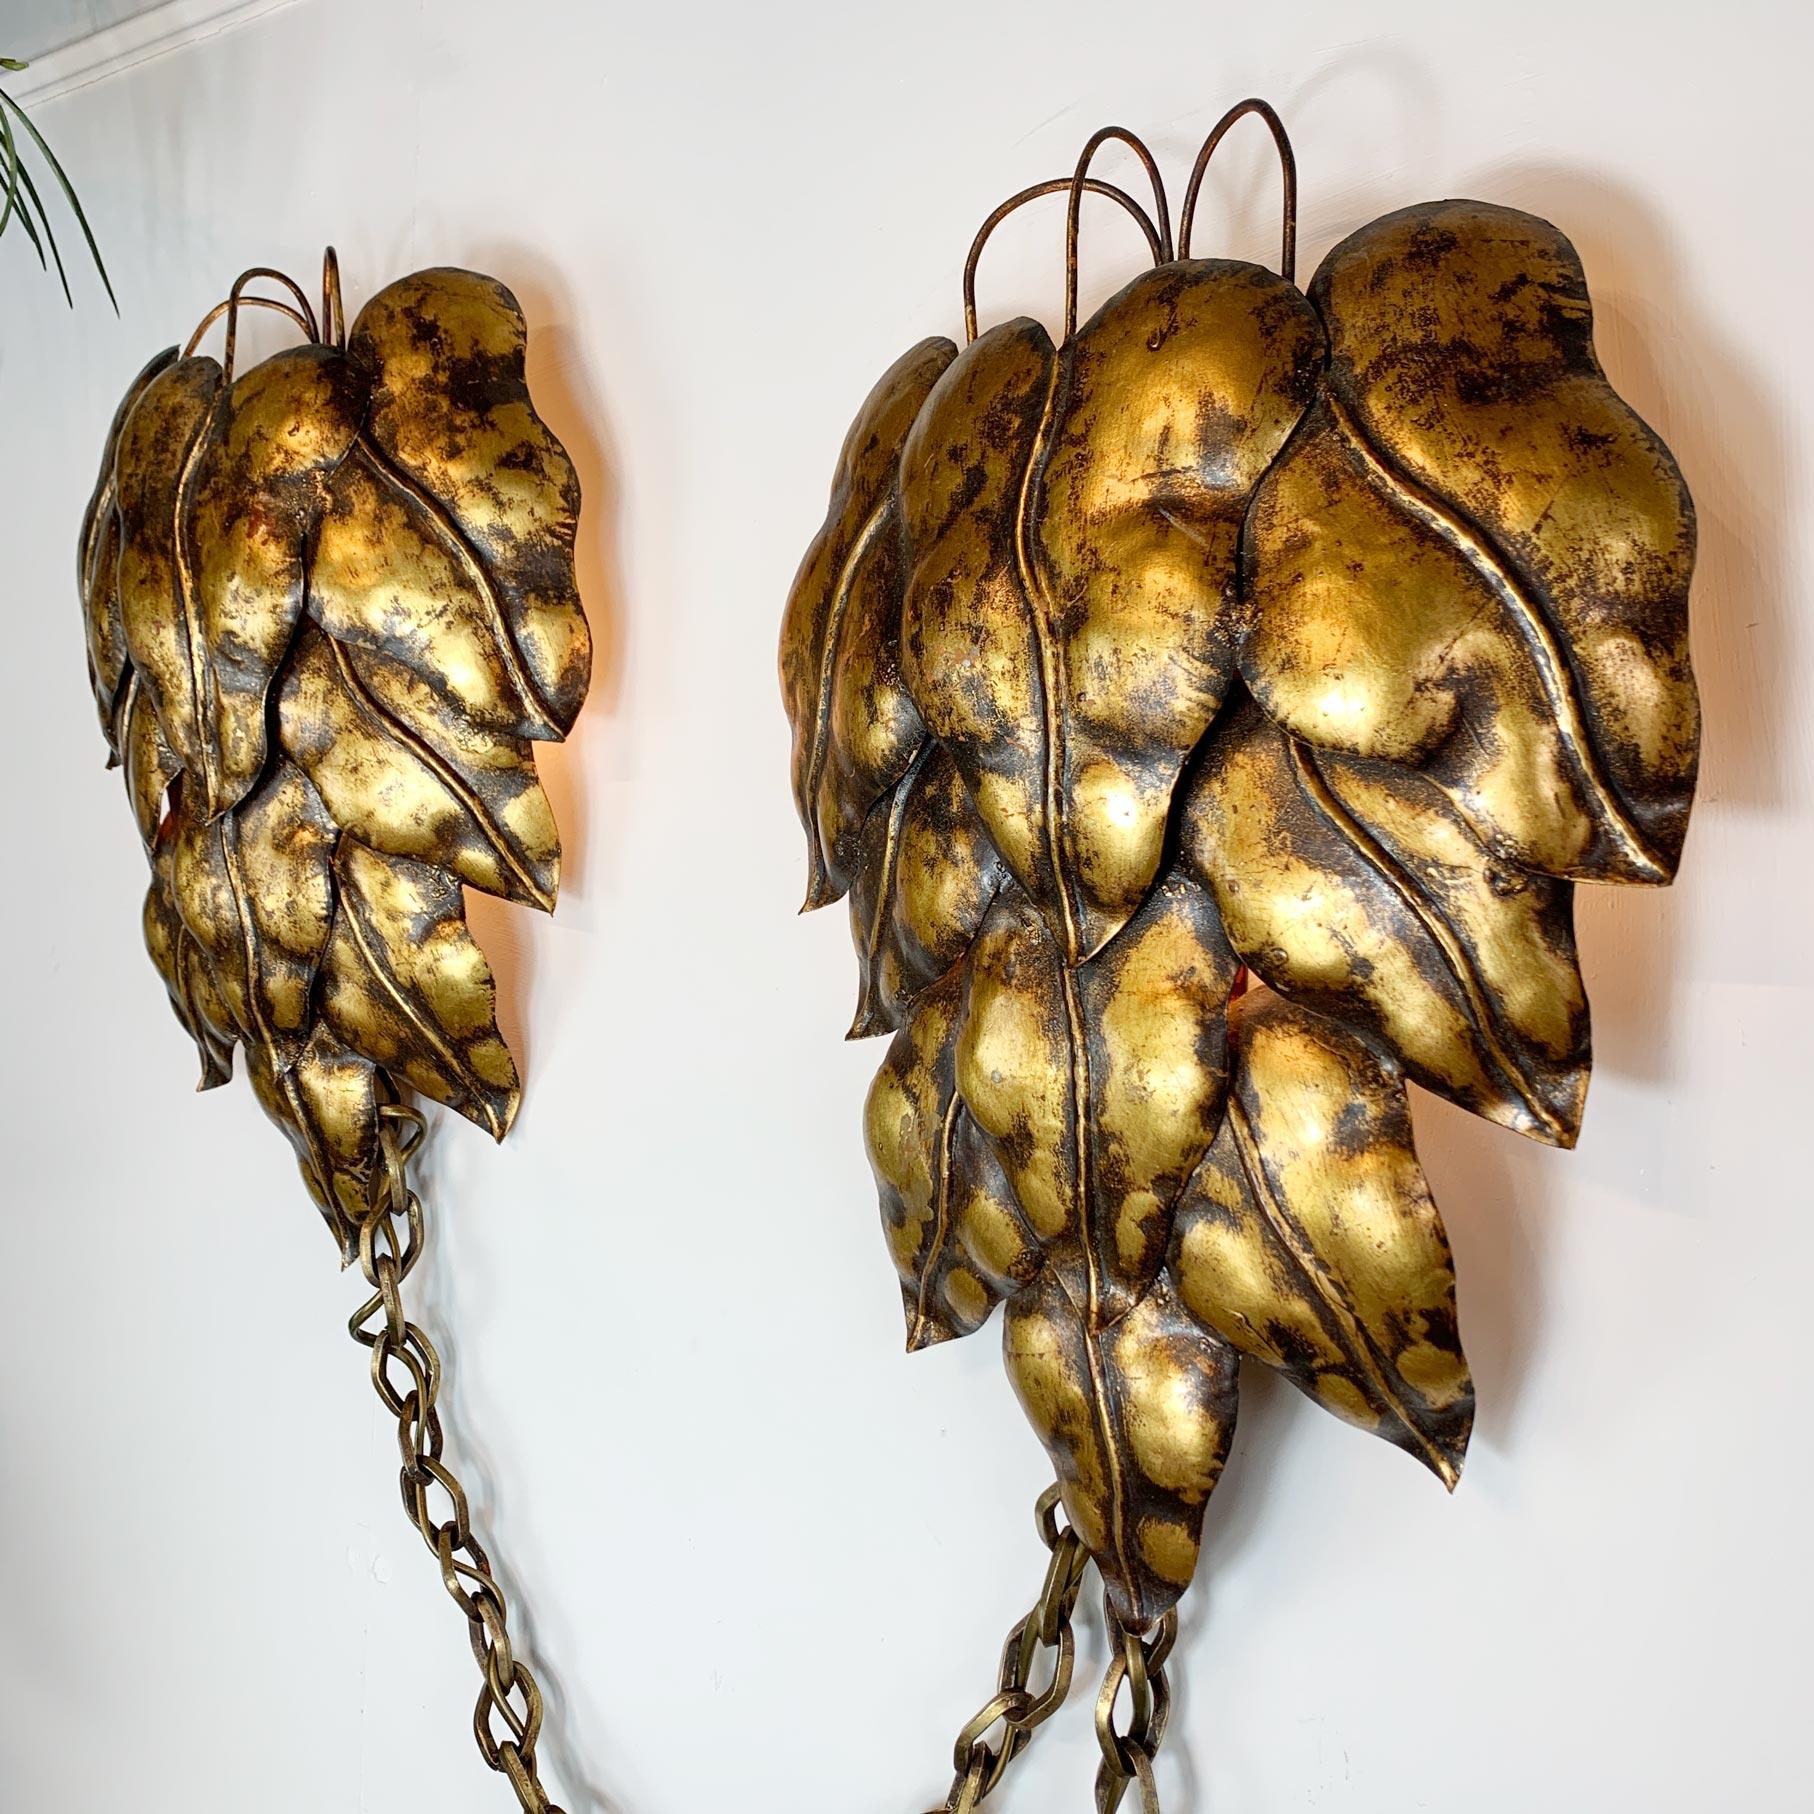 Pair of Gold Italian Leaf and Chain Swag Wall Lights, 1950's For Sale 3